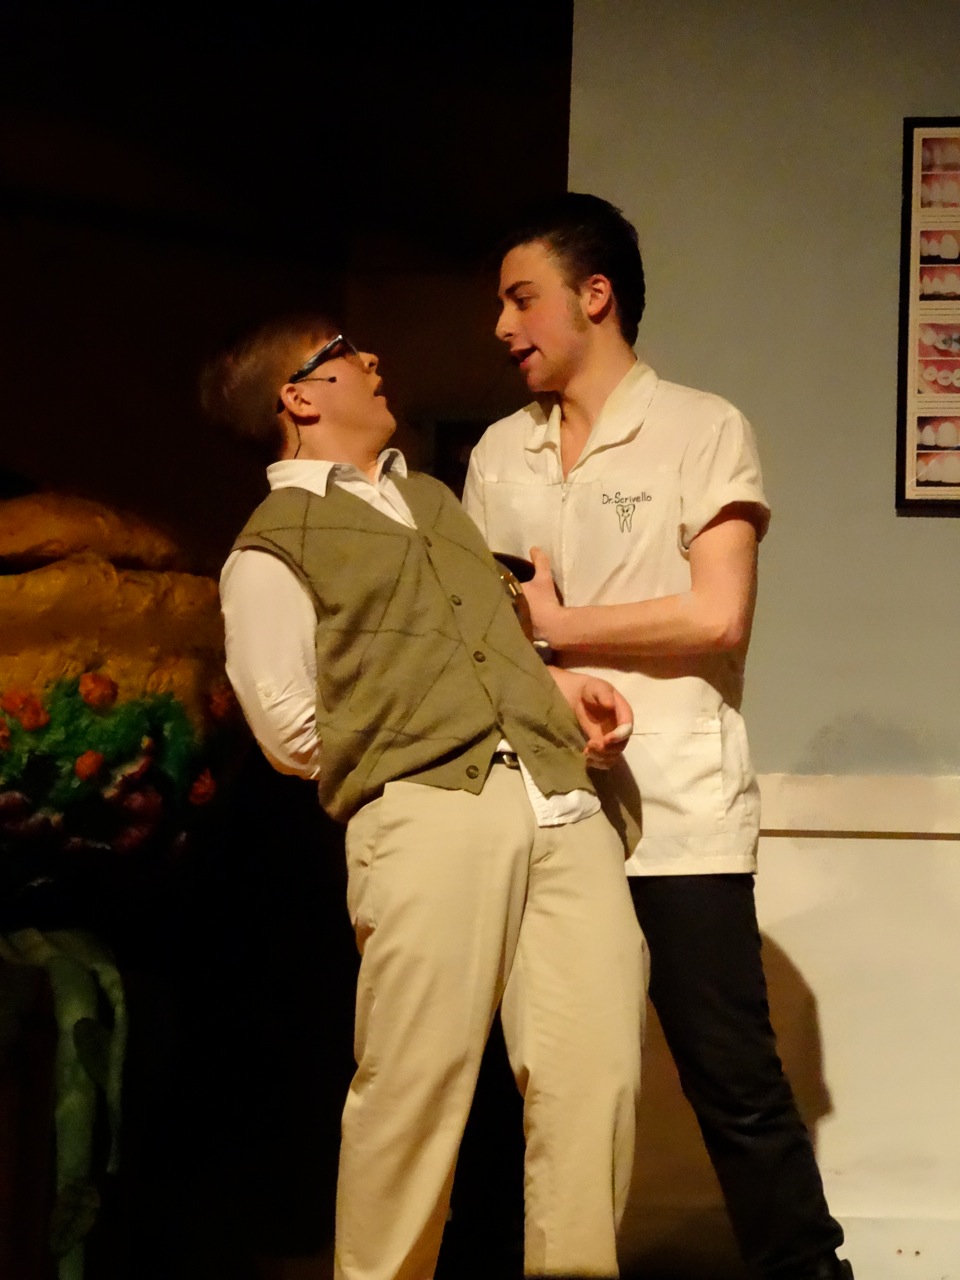 Adam as Orin in Little Shop of Horrors, with Jack Murphy.